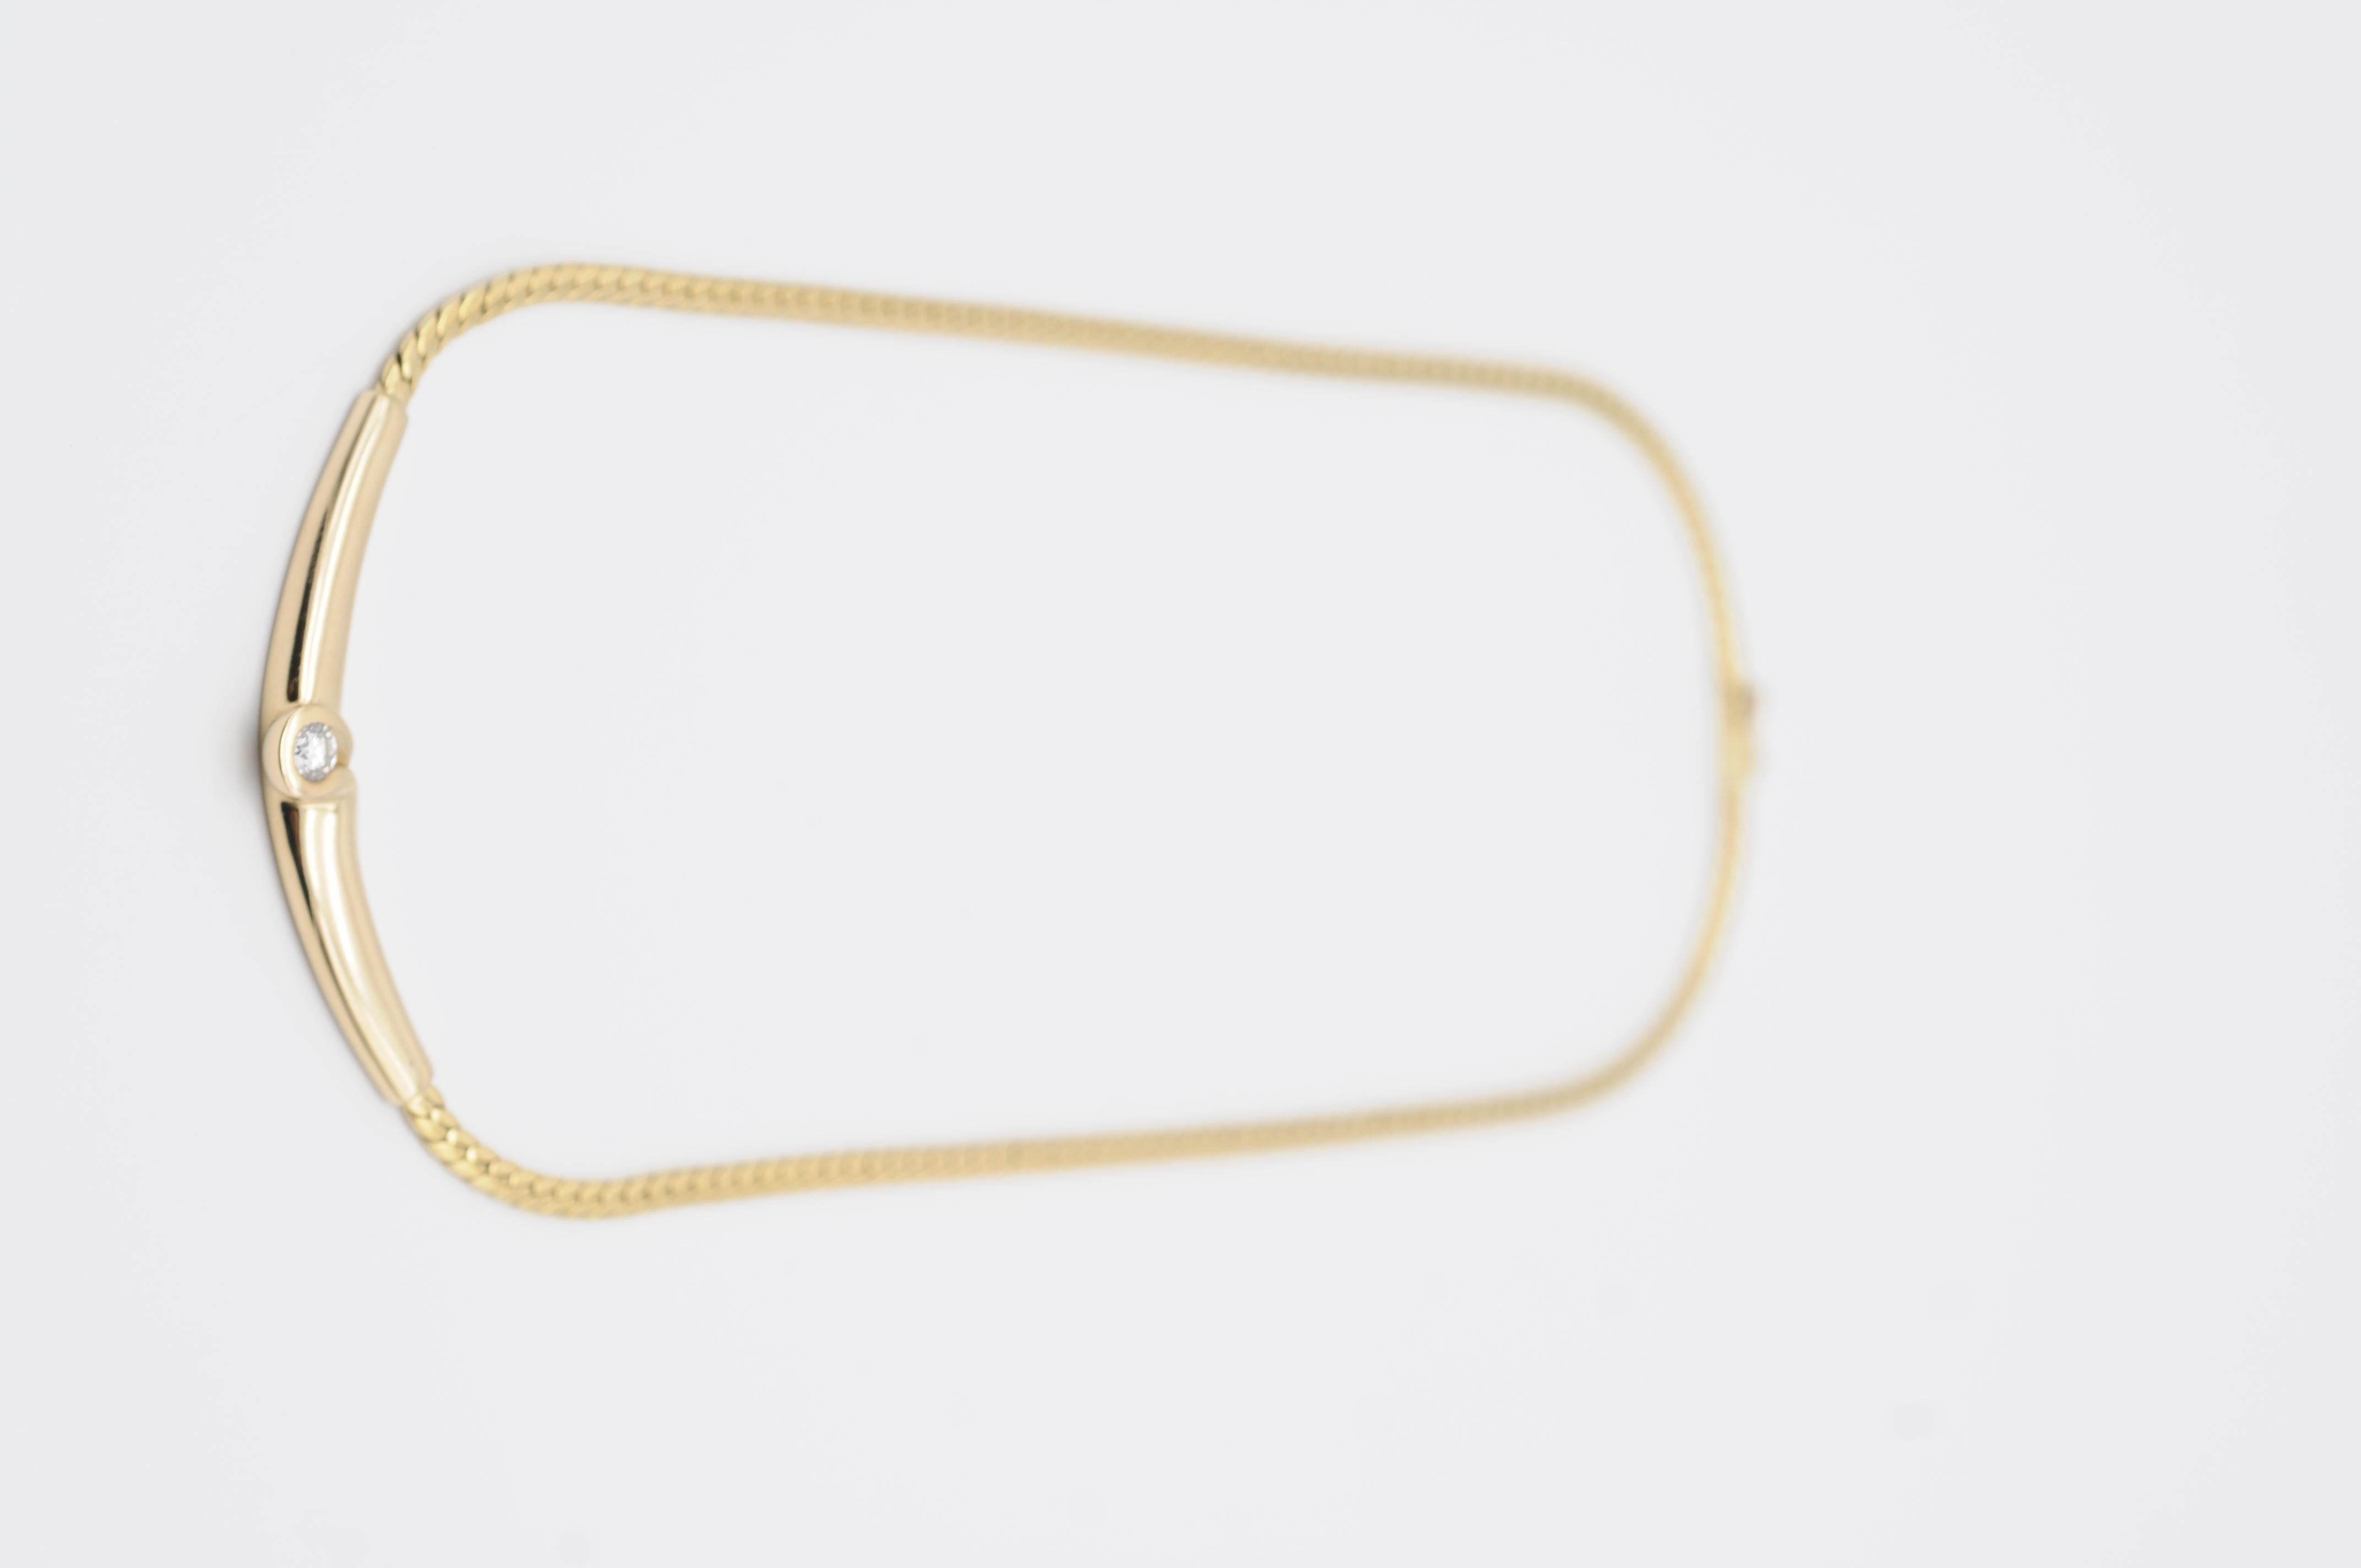 This 14K yellow gold necklace/collier is a true masterpiece. The classic link chain is adorned with a stunning red cabochon stone as the centerpiece, surrounded by a halo of sparkling diamonds. The red stone, with its smooth surface and rich hue,